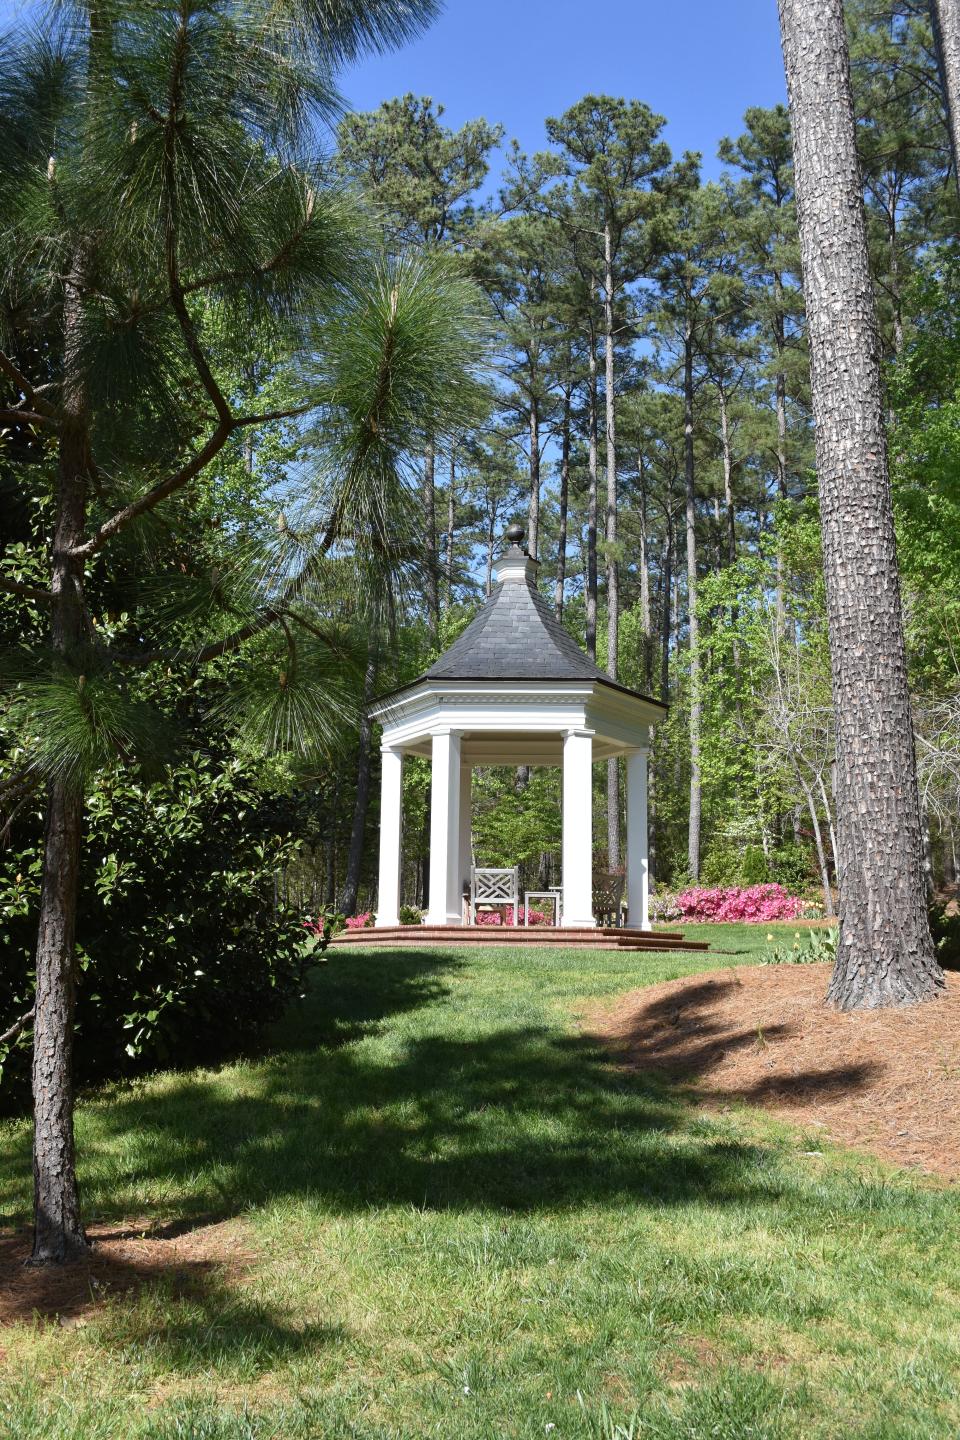 A hexagonal gazebo provides a shady spot to sit and rest on the far side of the pond at Betty Montgomery's garden in Campobello SC. April 2022